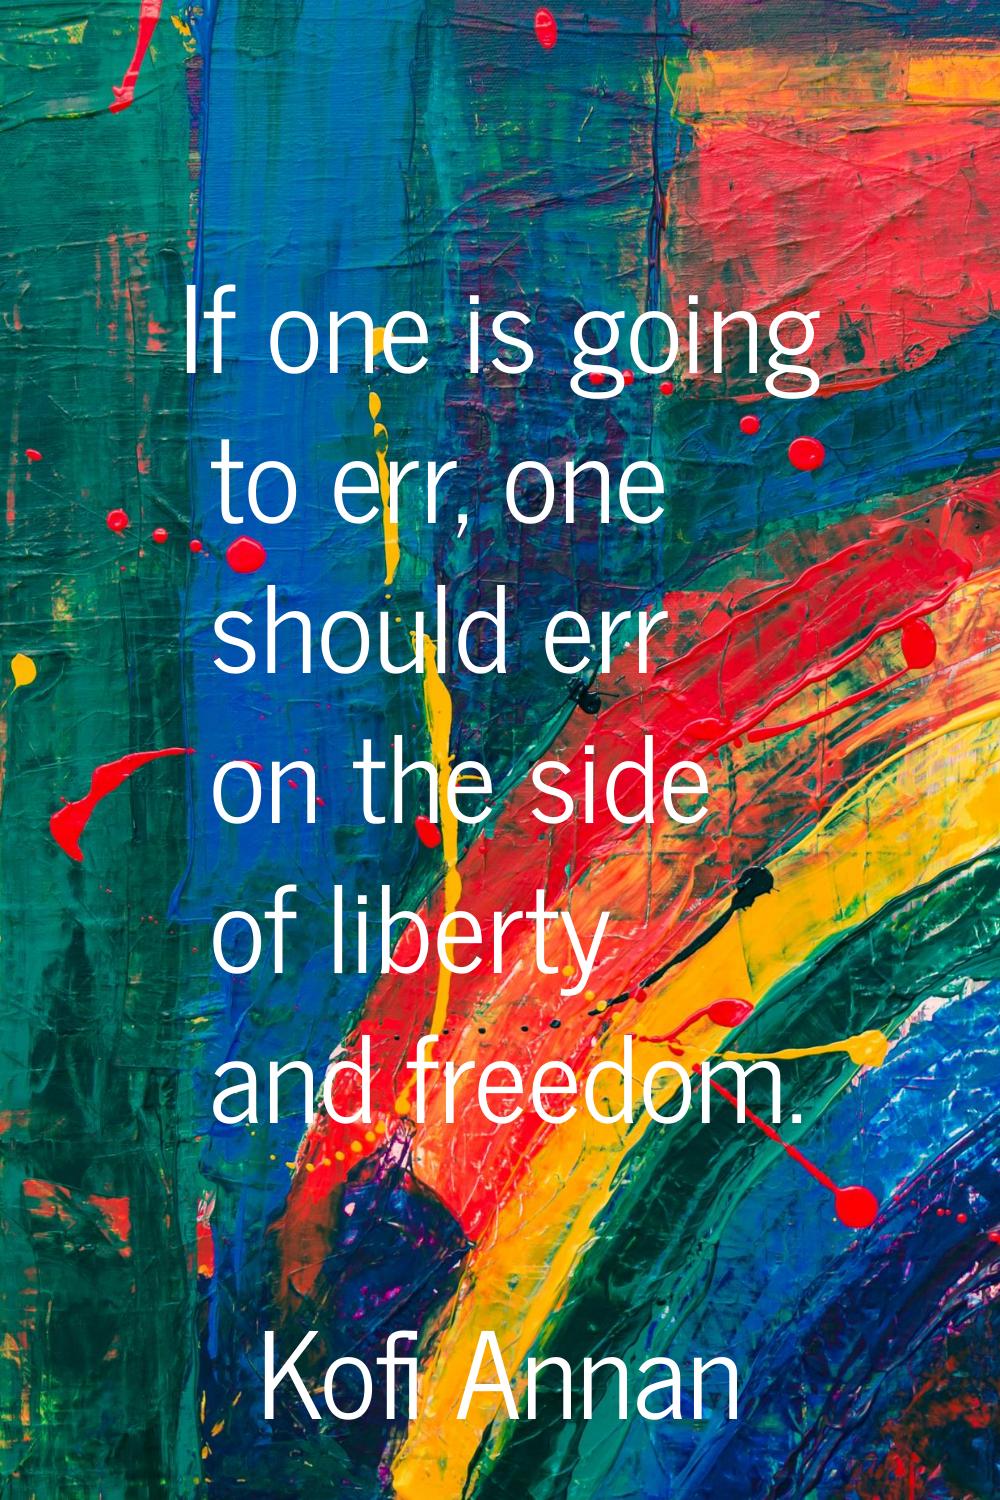 If one is going to err, one should err on the side of liberty and freedom.